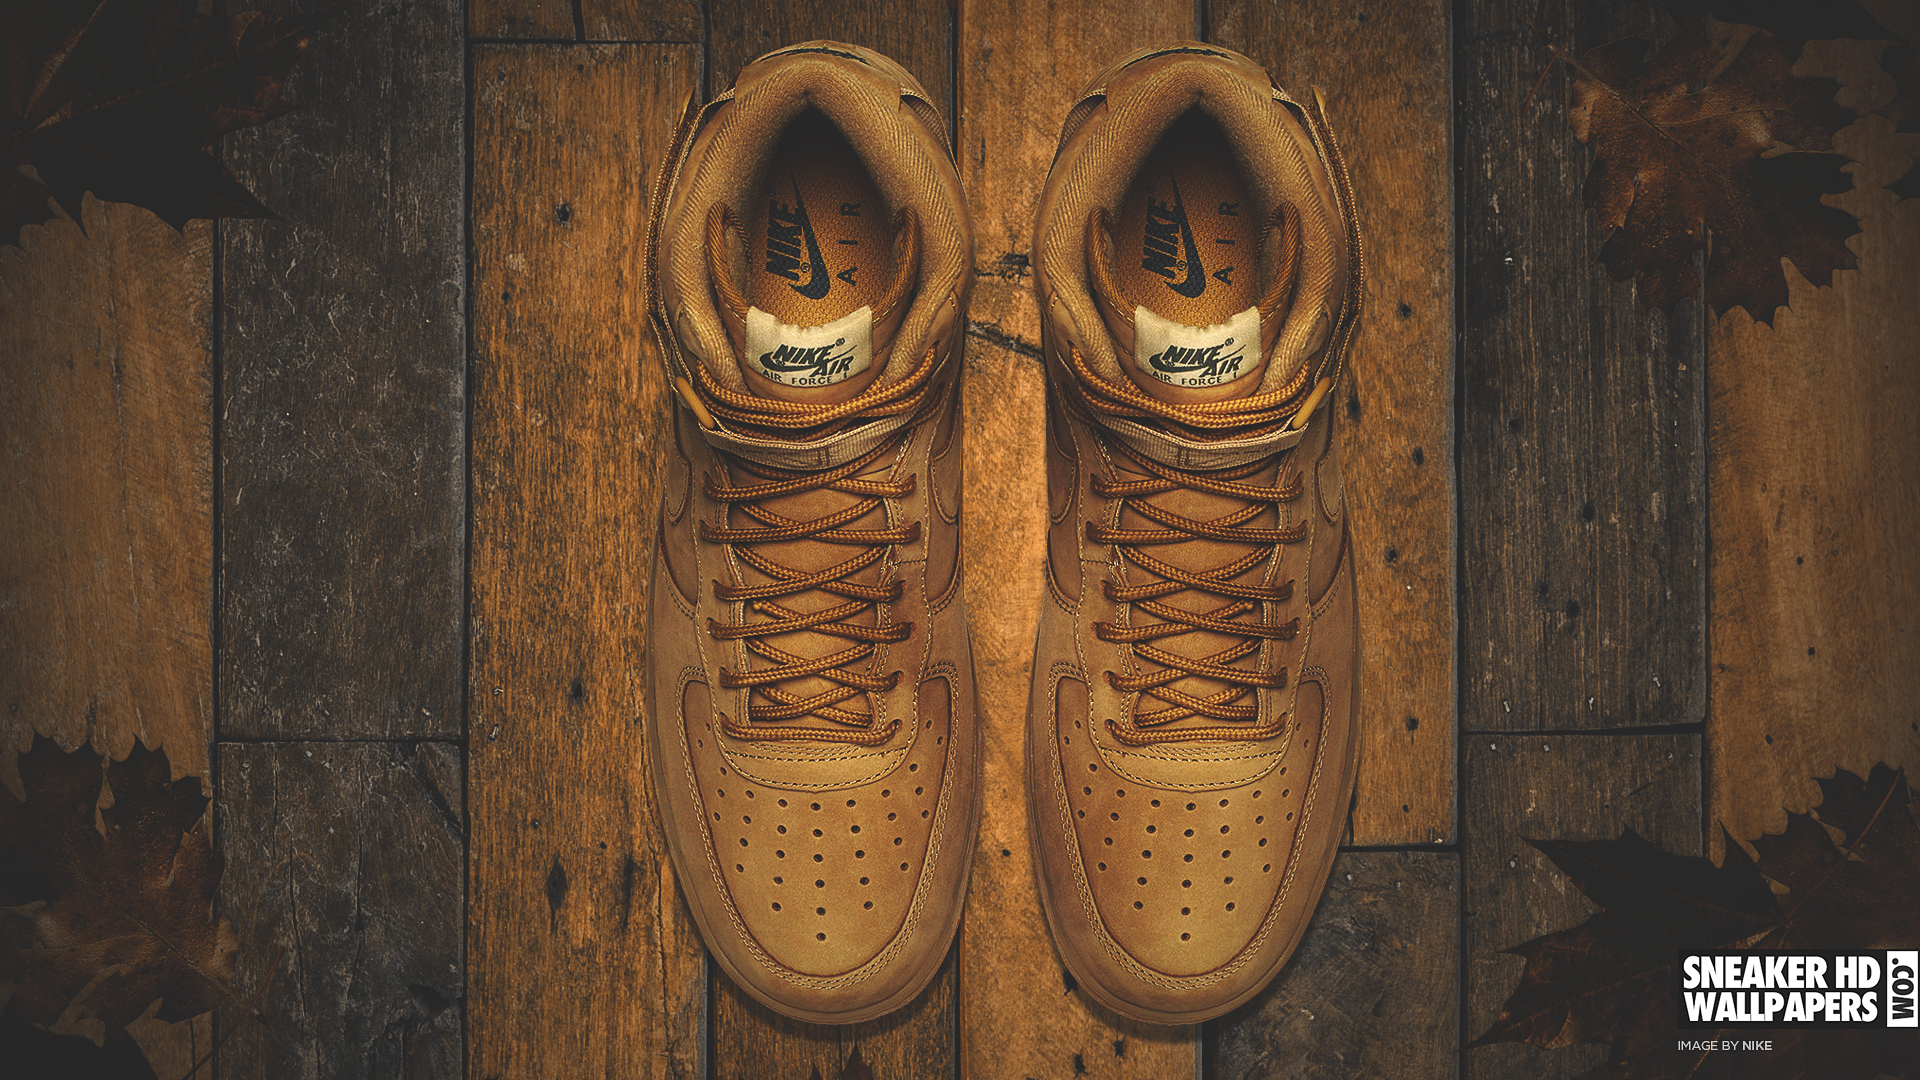 1920x1080 &acirc;&#128;&#147; Your favorite sneakers in 4K, Retina, Mobile and HD wallpaper resolutions! &Acirc;&raquo; Blog Archive NEW Nike Air Force 1 High